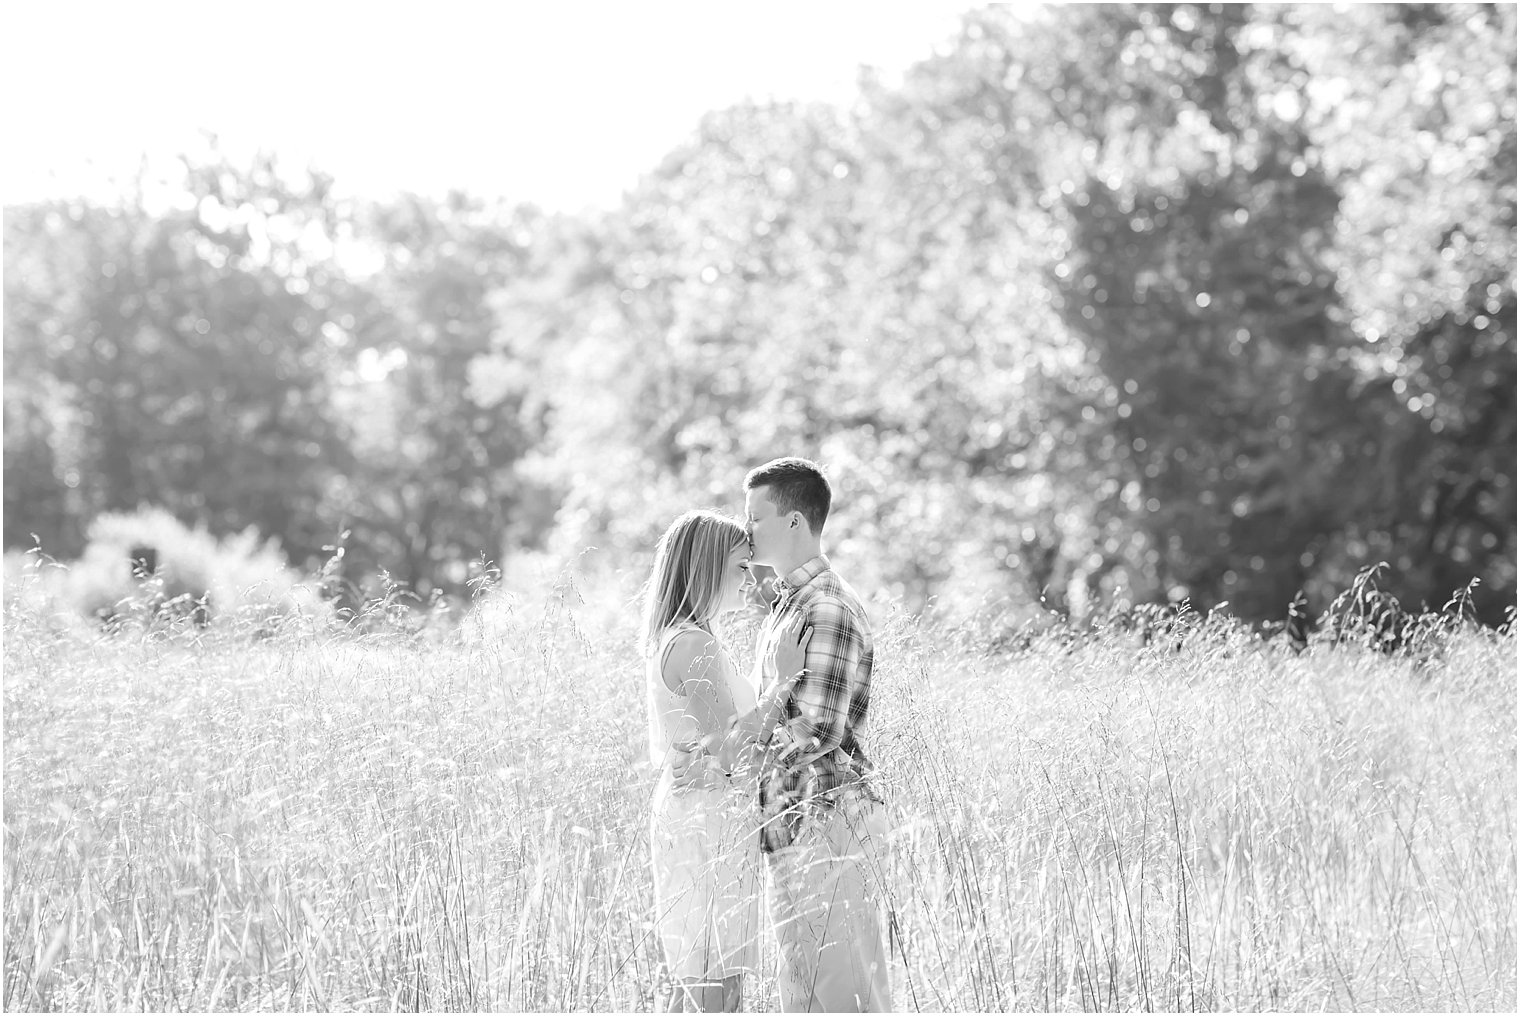 Engagement photos in a field of tall grass